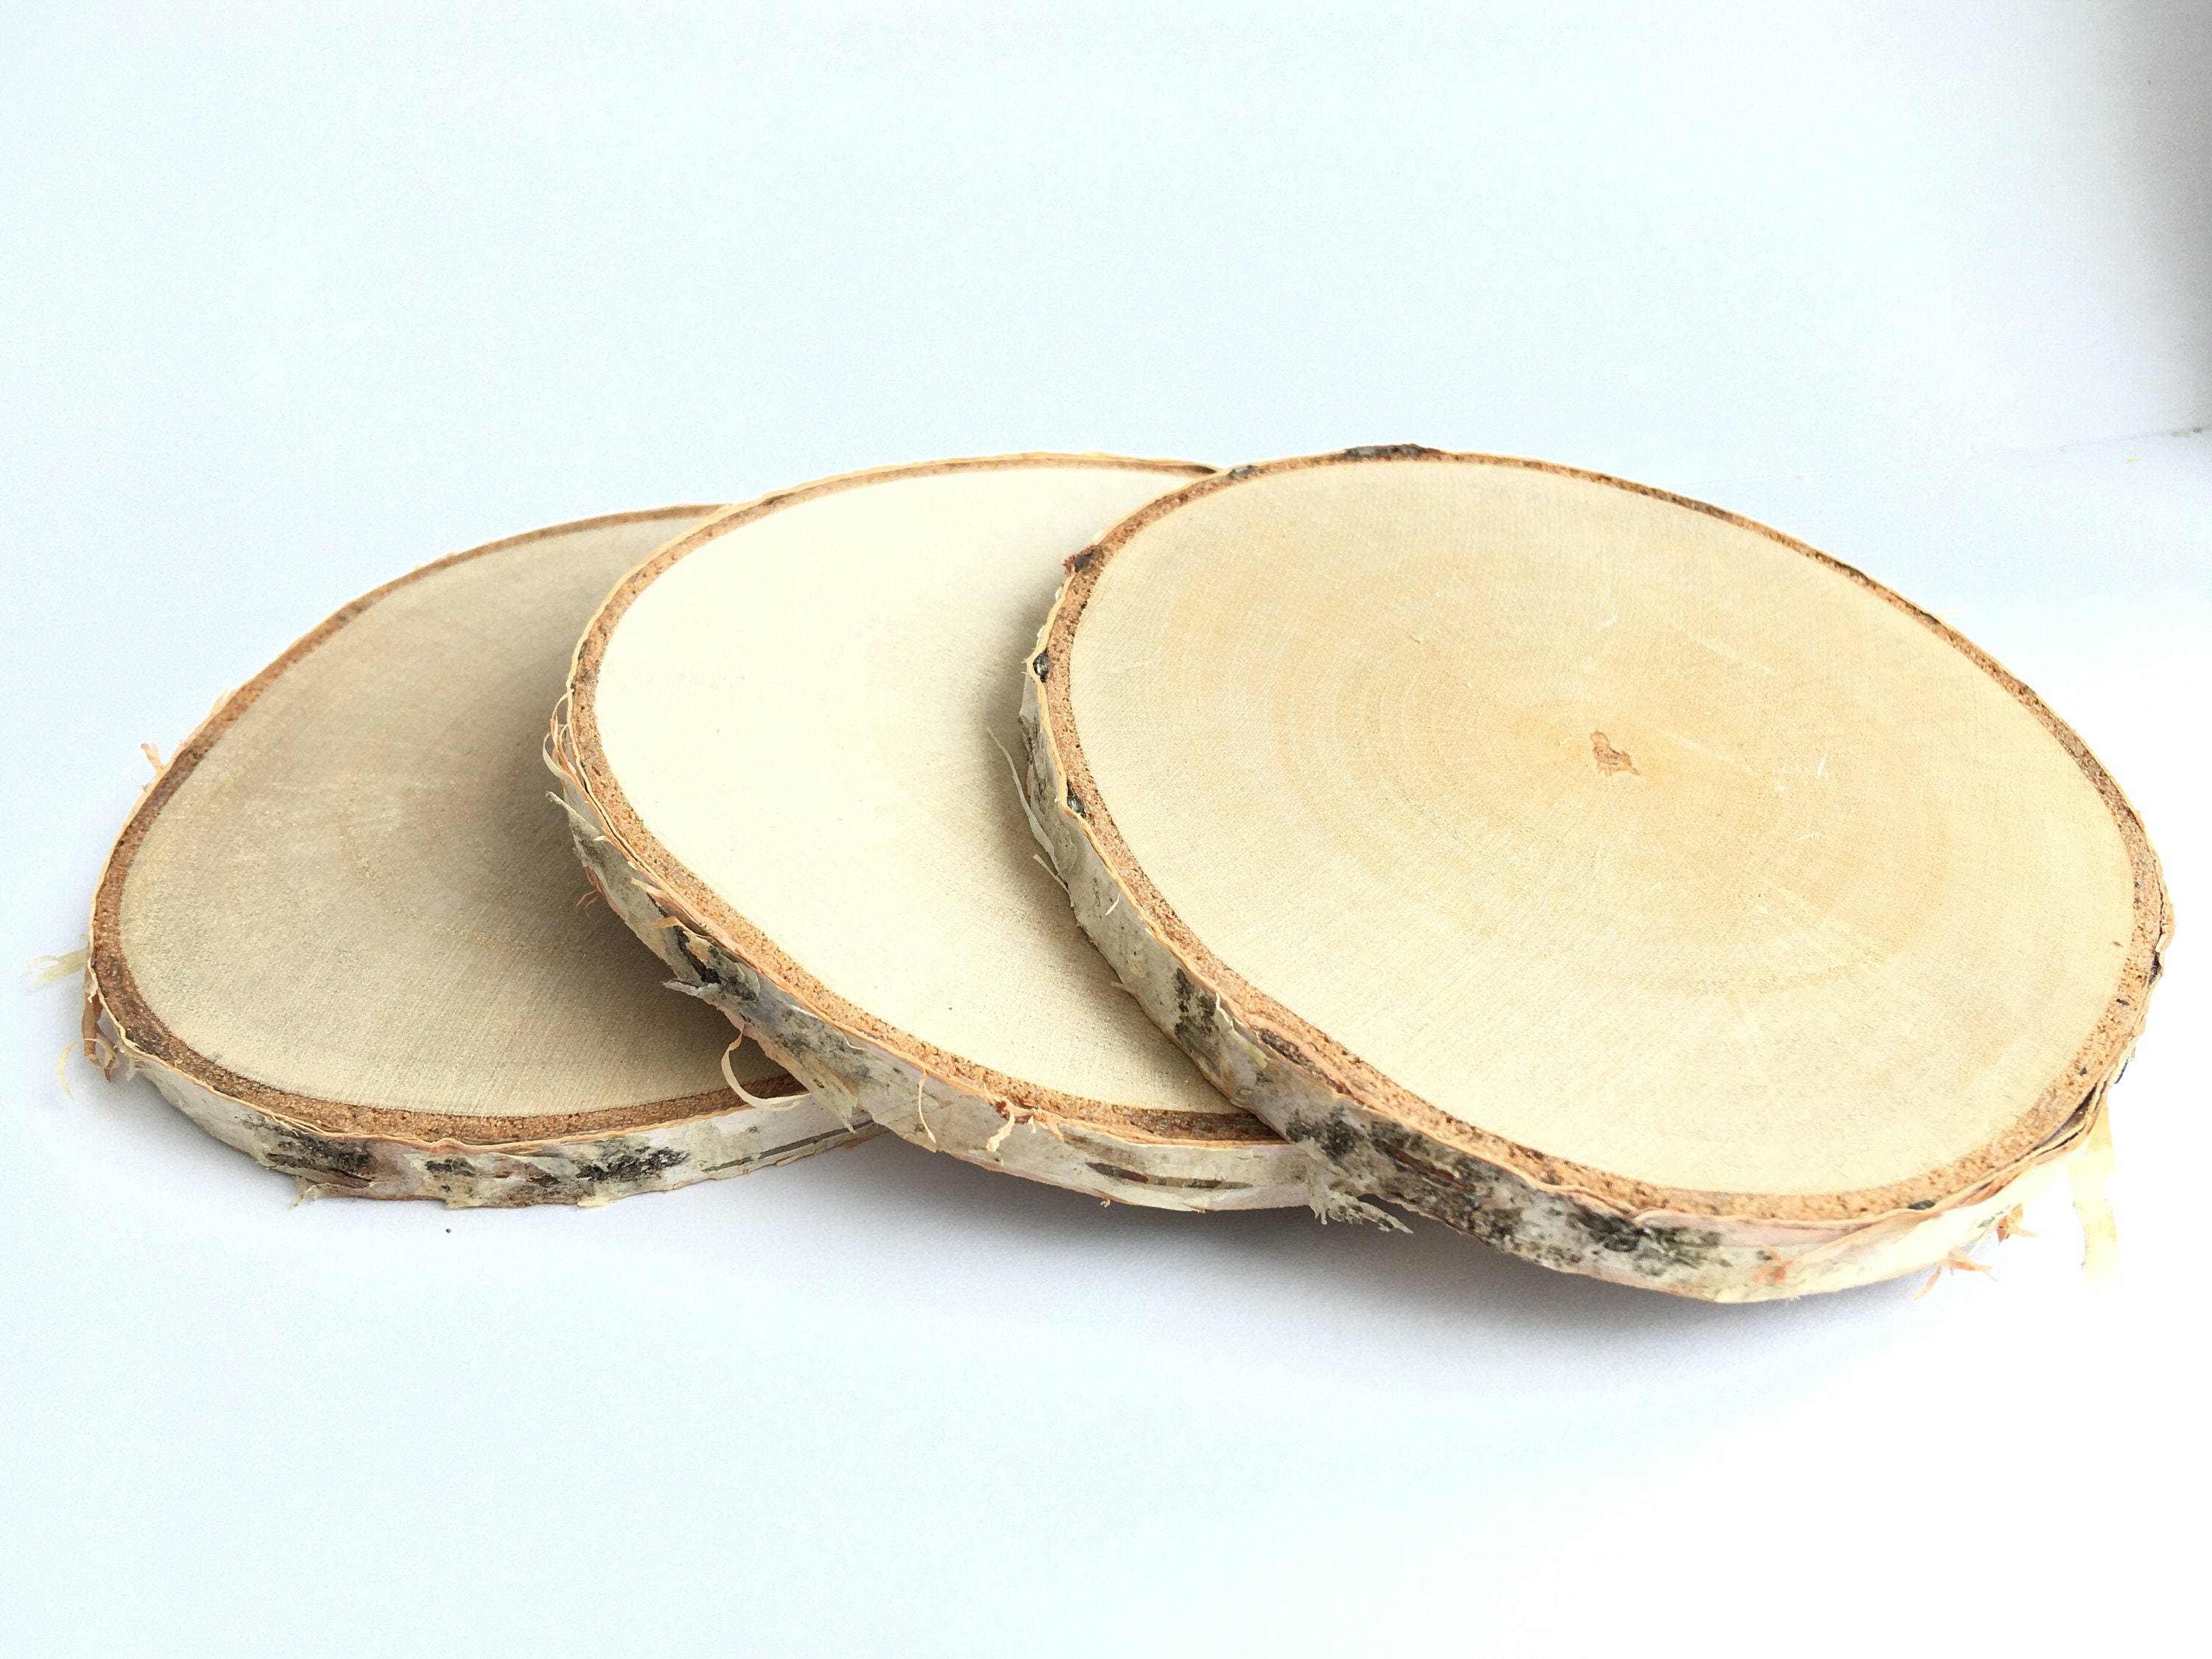 Unfinished Natural Wood Slices 12 Pcs 3.5-4 inch Craft Wood kit Circles  Crafts Ornaments - Holiday Ornaments - New York, New York, Facebook  Marketplace